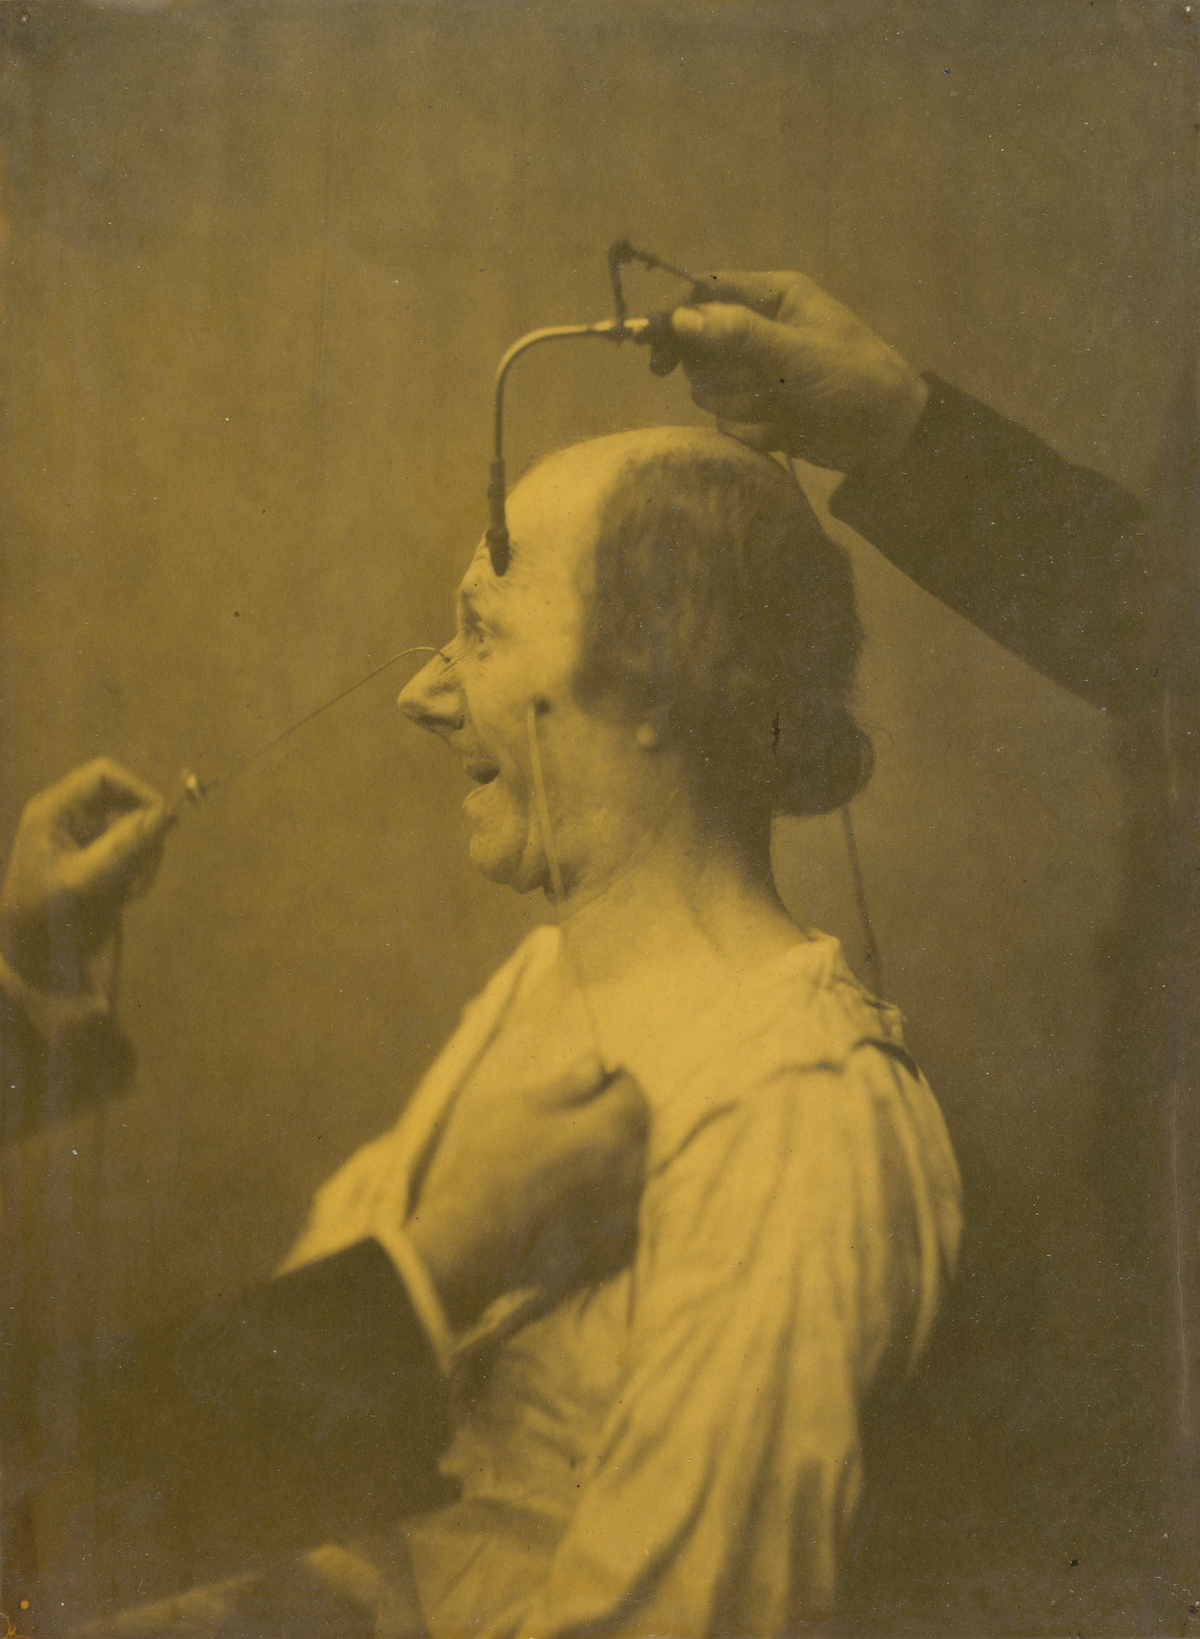 Experiments-in-facial-expressions-by-Guillaume-Benjamin-Amand-Duchenne-de-Boulogne-37.jpeg